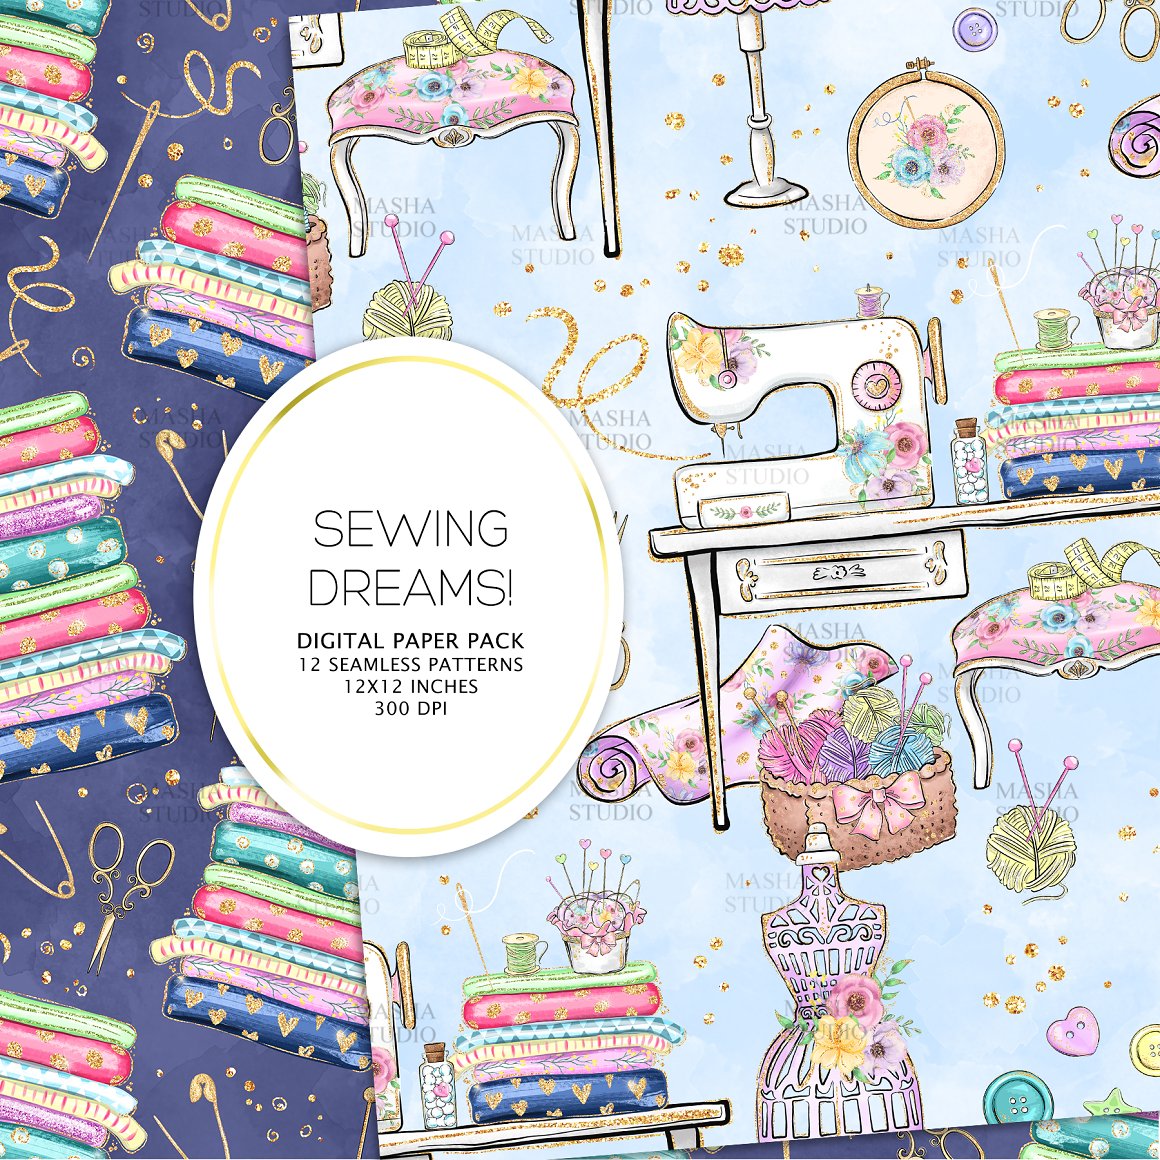 The background is light blue and dark blue with items for sewing.